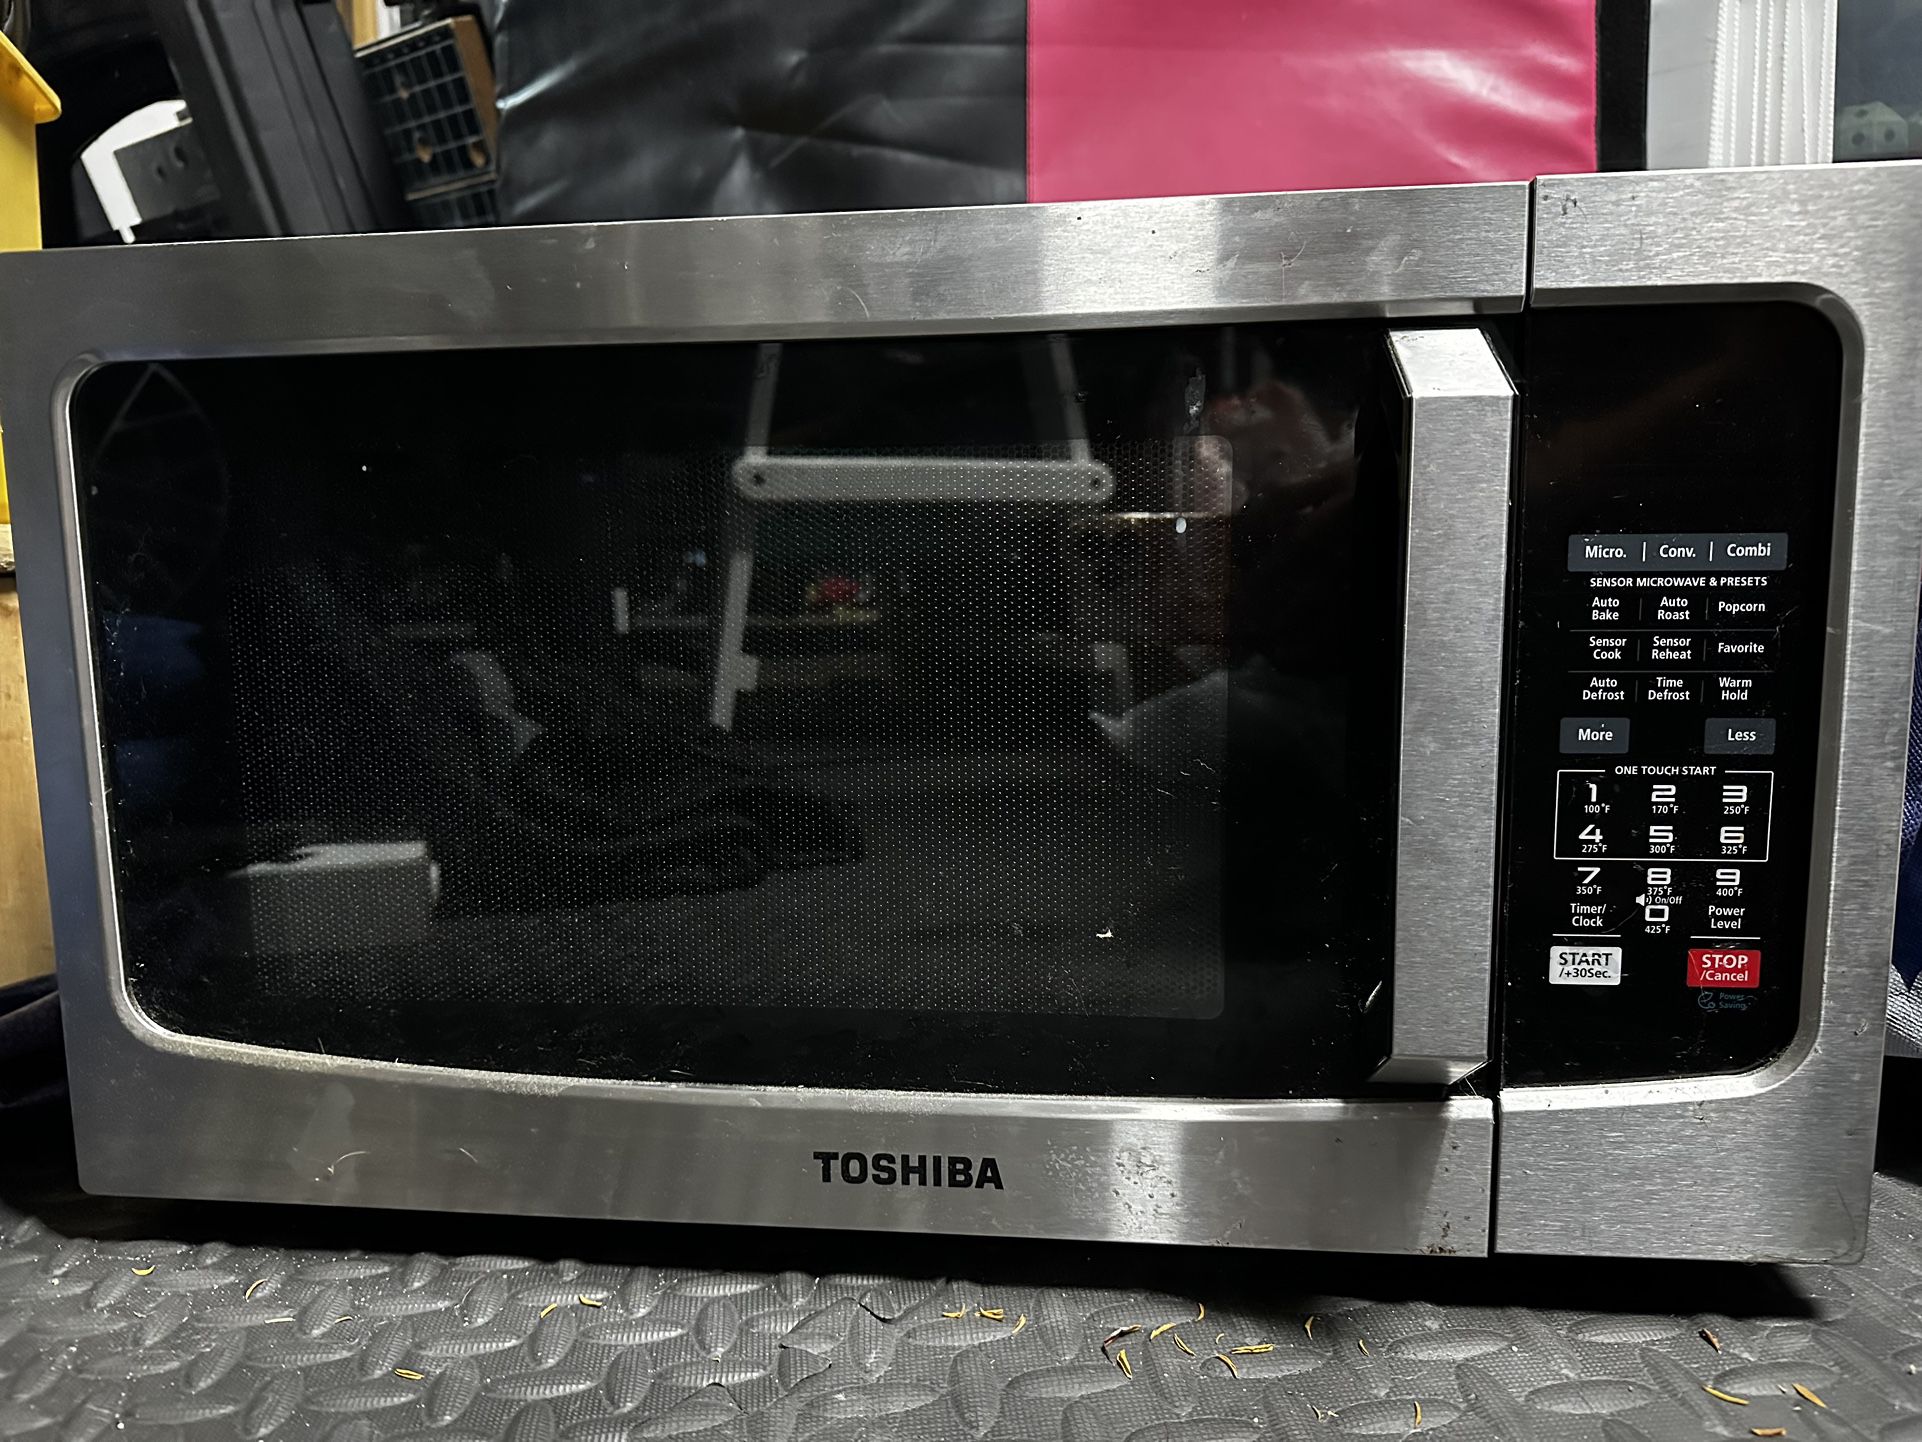 Microwave/Convection/Combi Oven